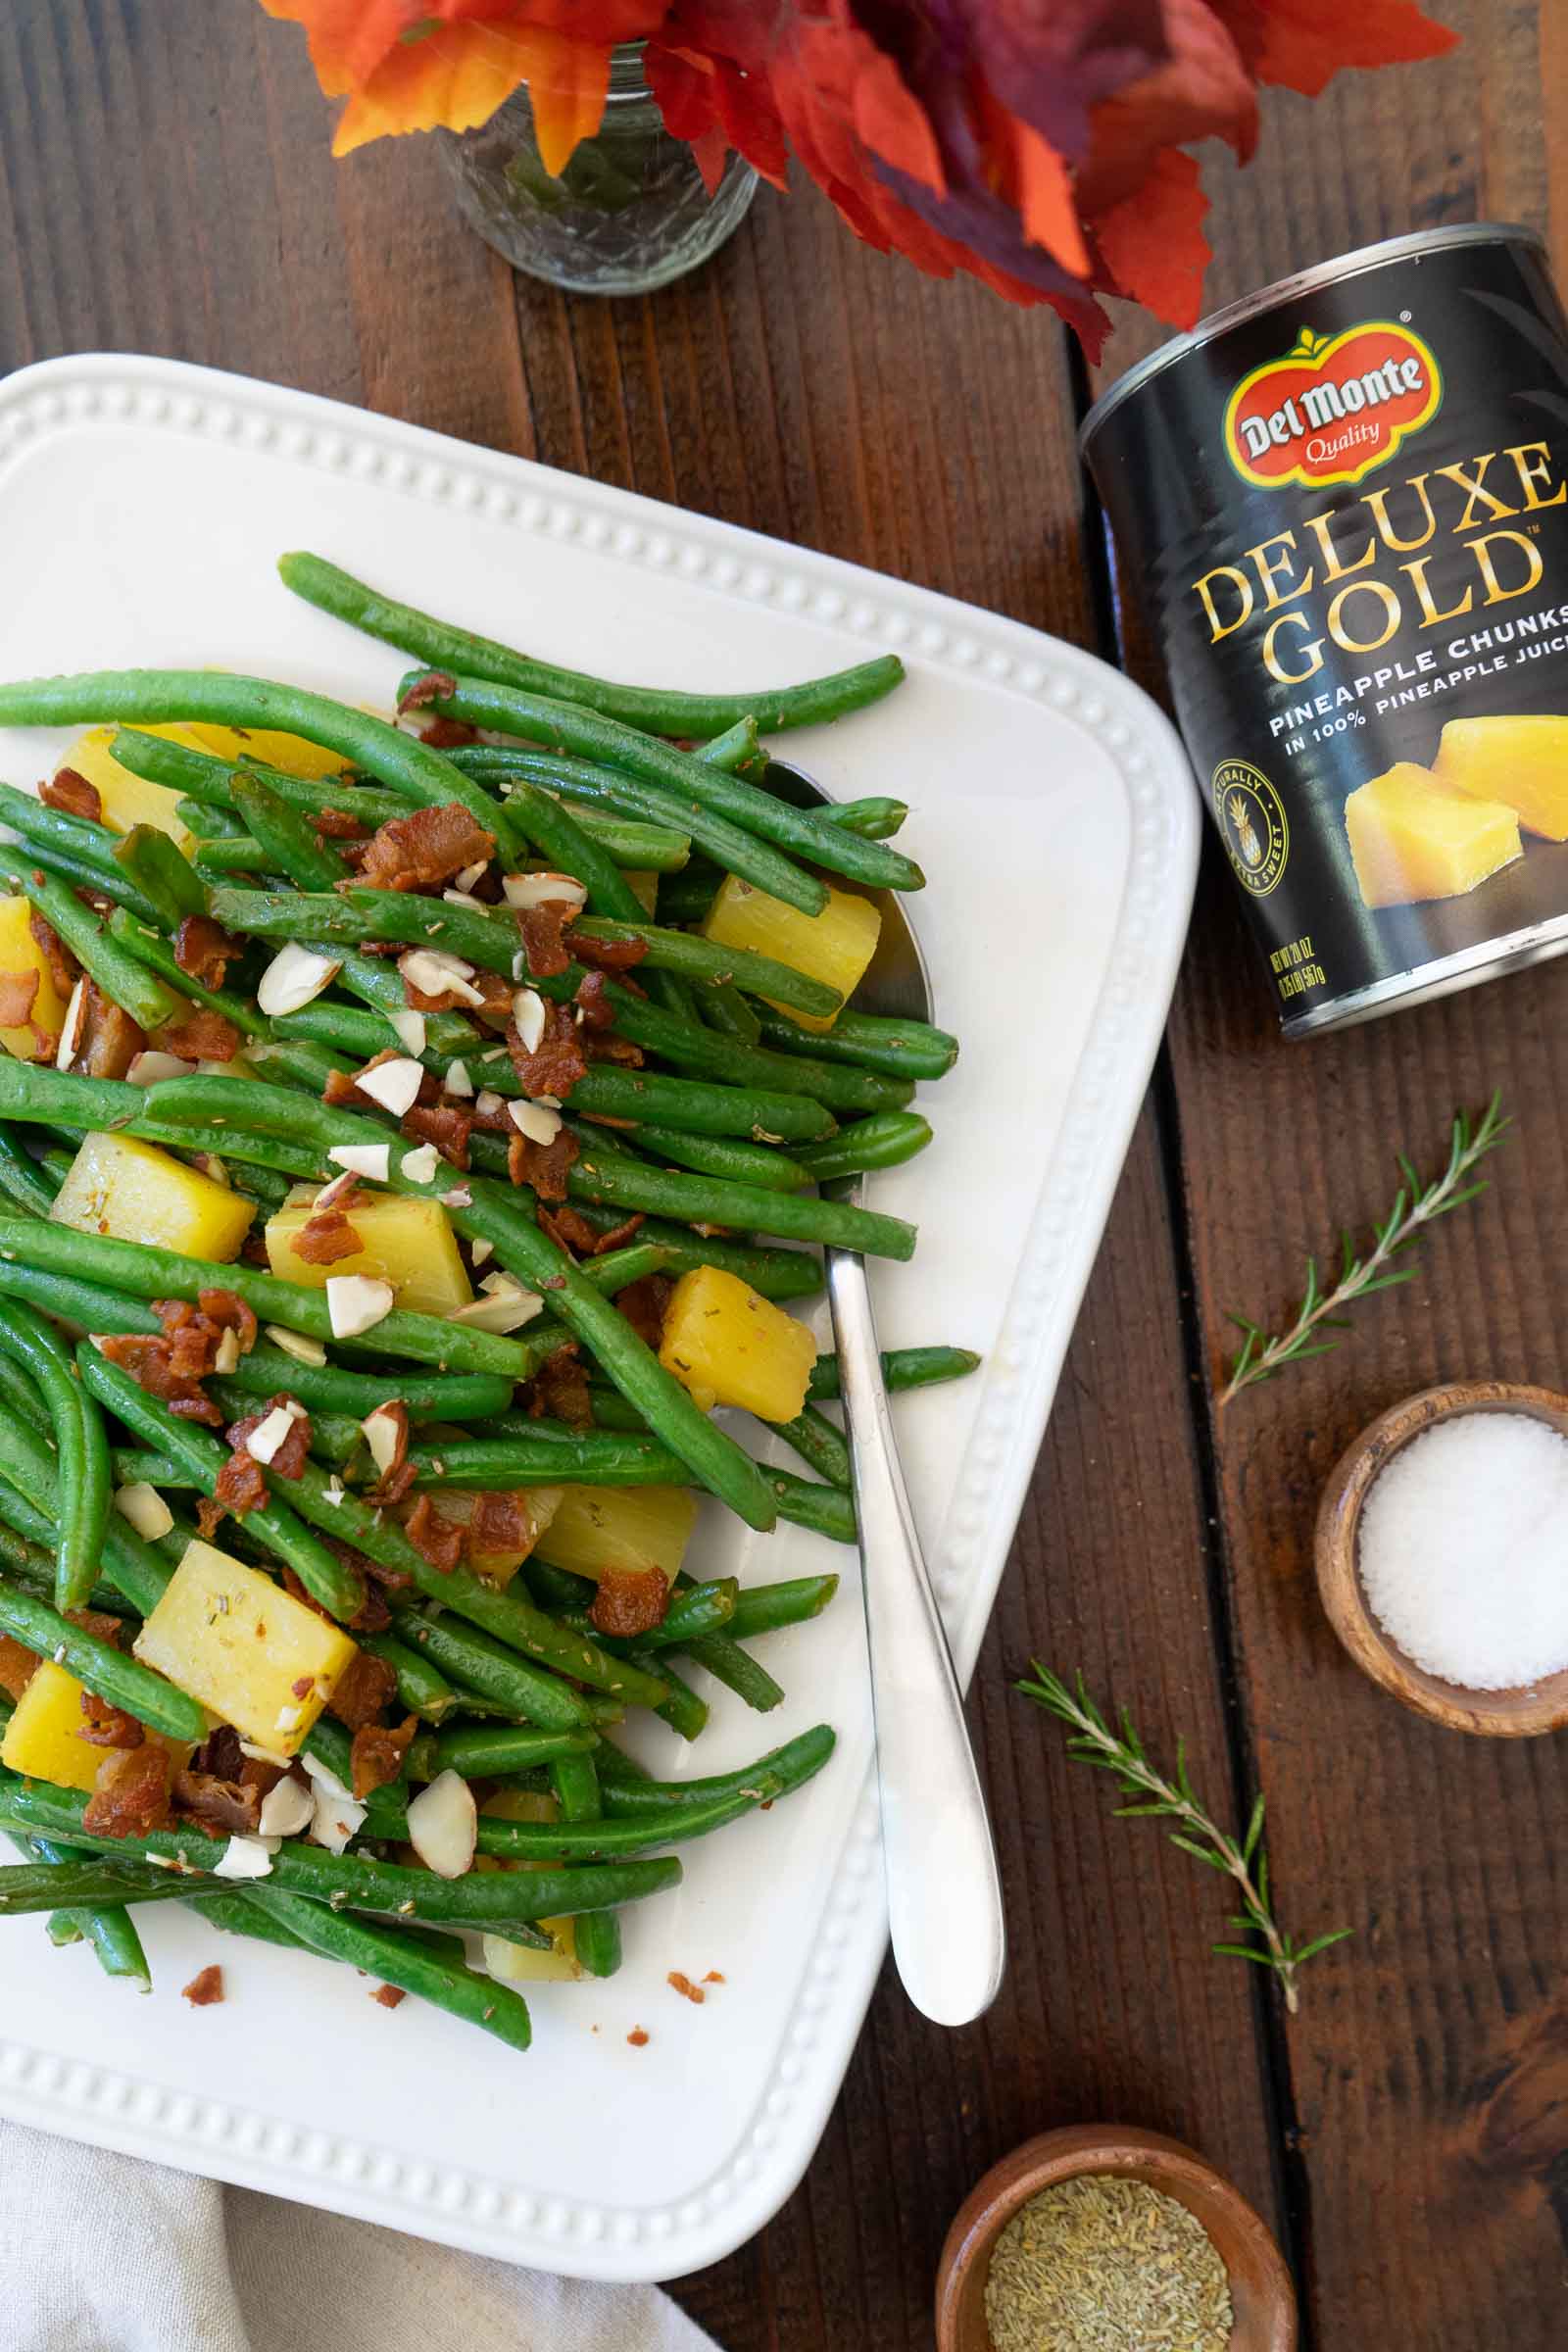 Green beans with pineapple and bacon on a platter , topped with almonds and a Del Monte Pineapple can in the corner.